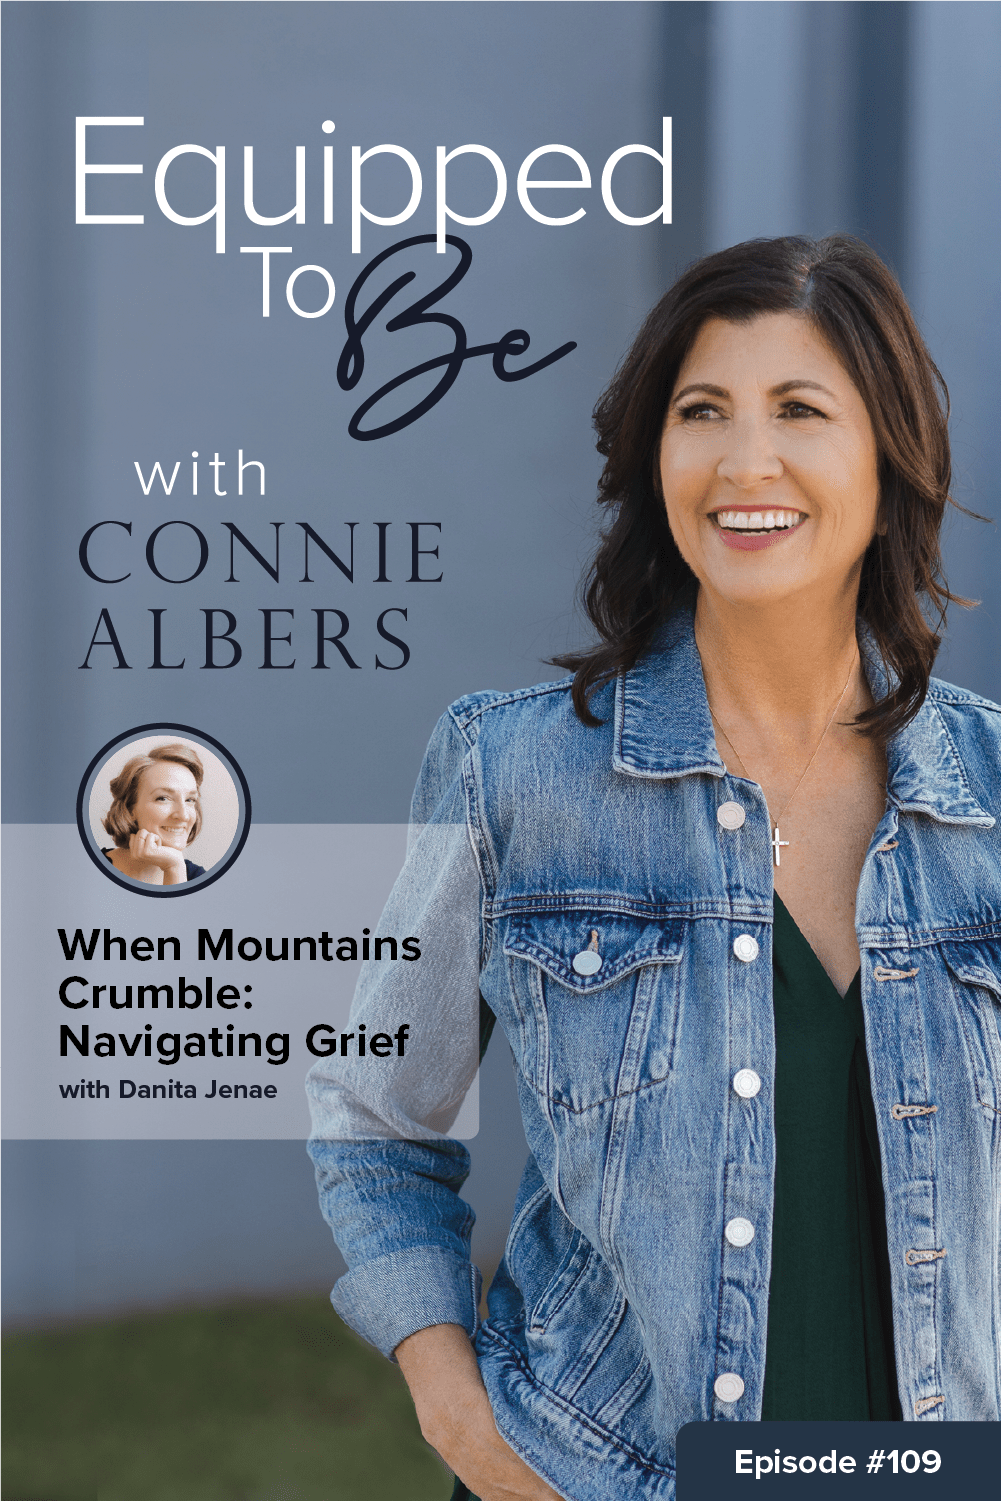 When Mountains Crumble: Navigating Grief with Danita Jenae - ETB #109